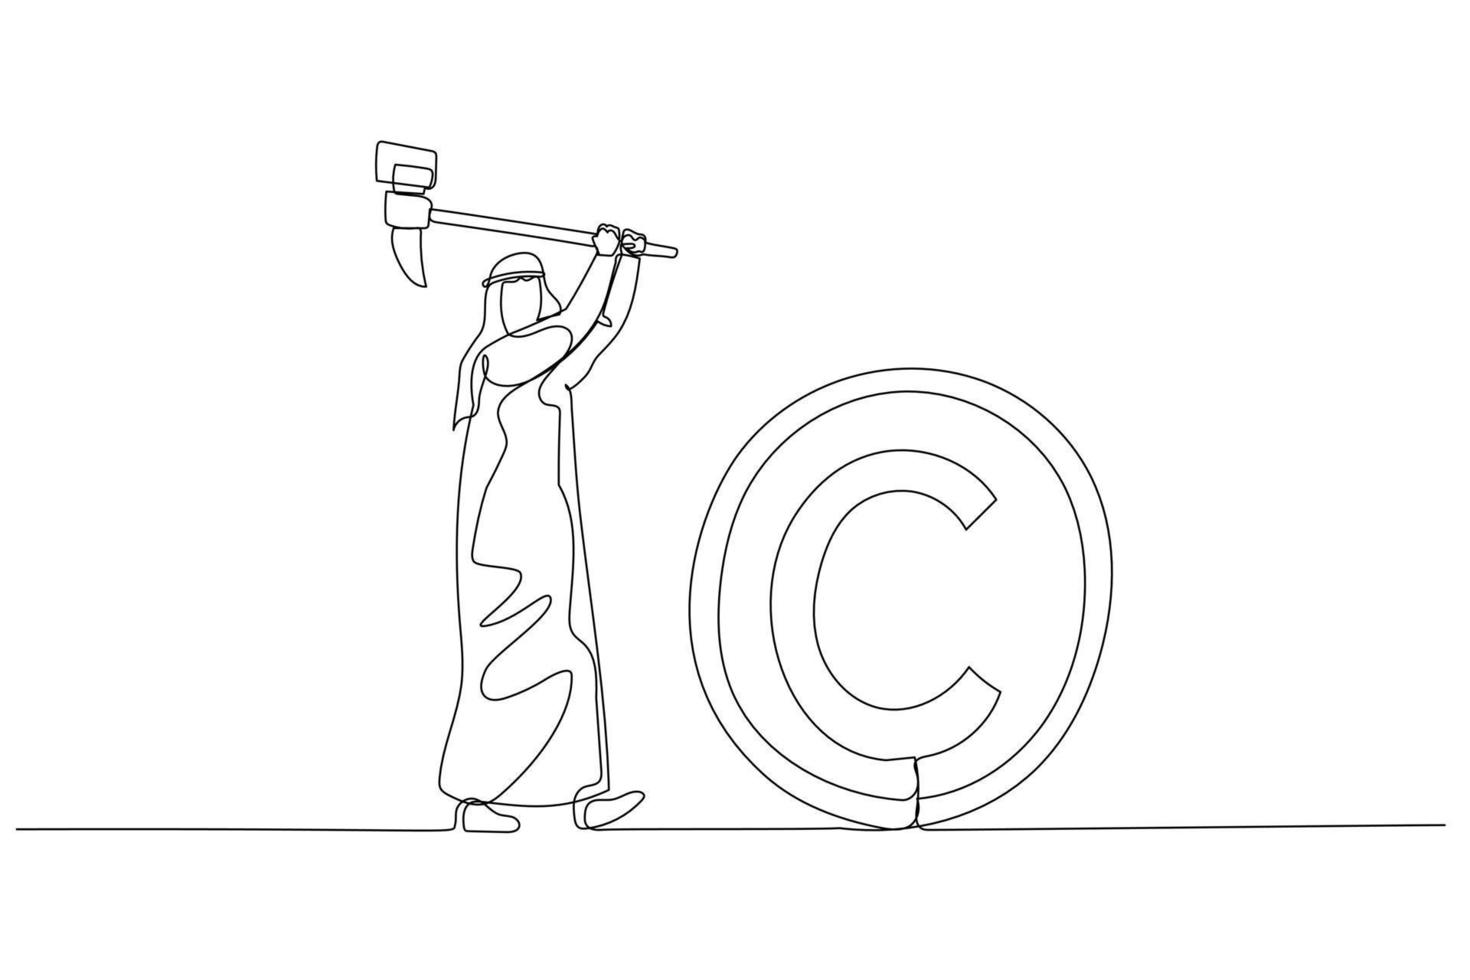 Cartoon of arab businessman with hammer try to smash COPYRIGHT sign. Concept of copyright infringement. Continuous line art vector